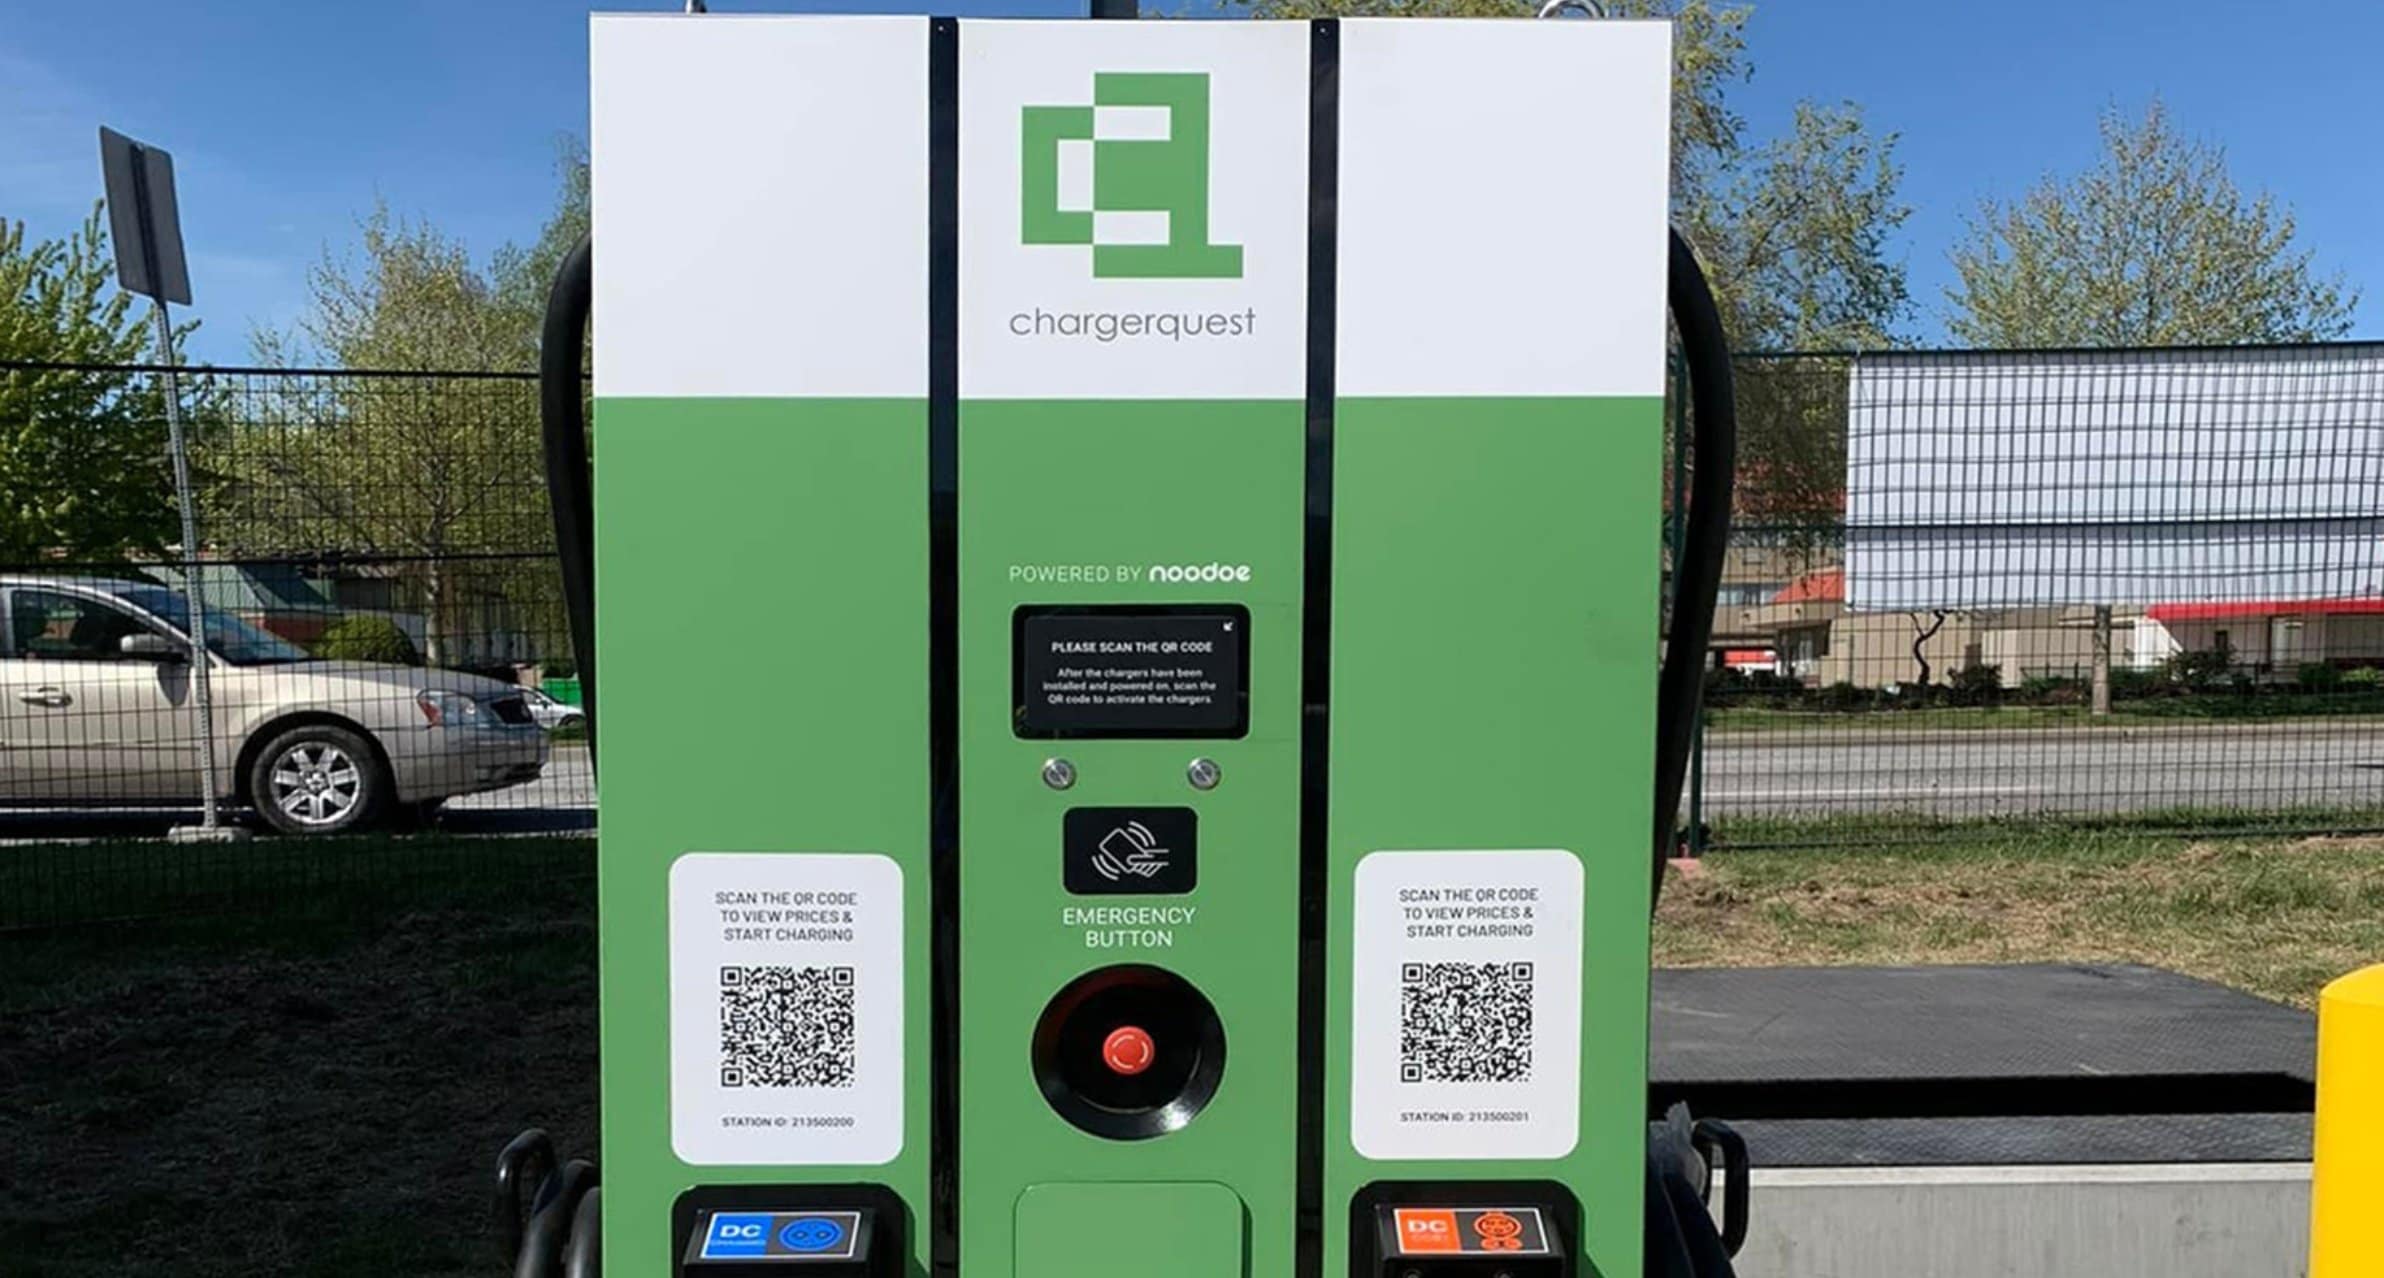 120kw charger - 150kw ev charger - high powered ev charging station - canada - A 'Powered by Noodoe' ChargerQuest DC fast charger in Tobermory, Ontario, Canada